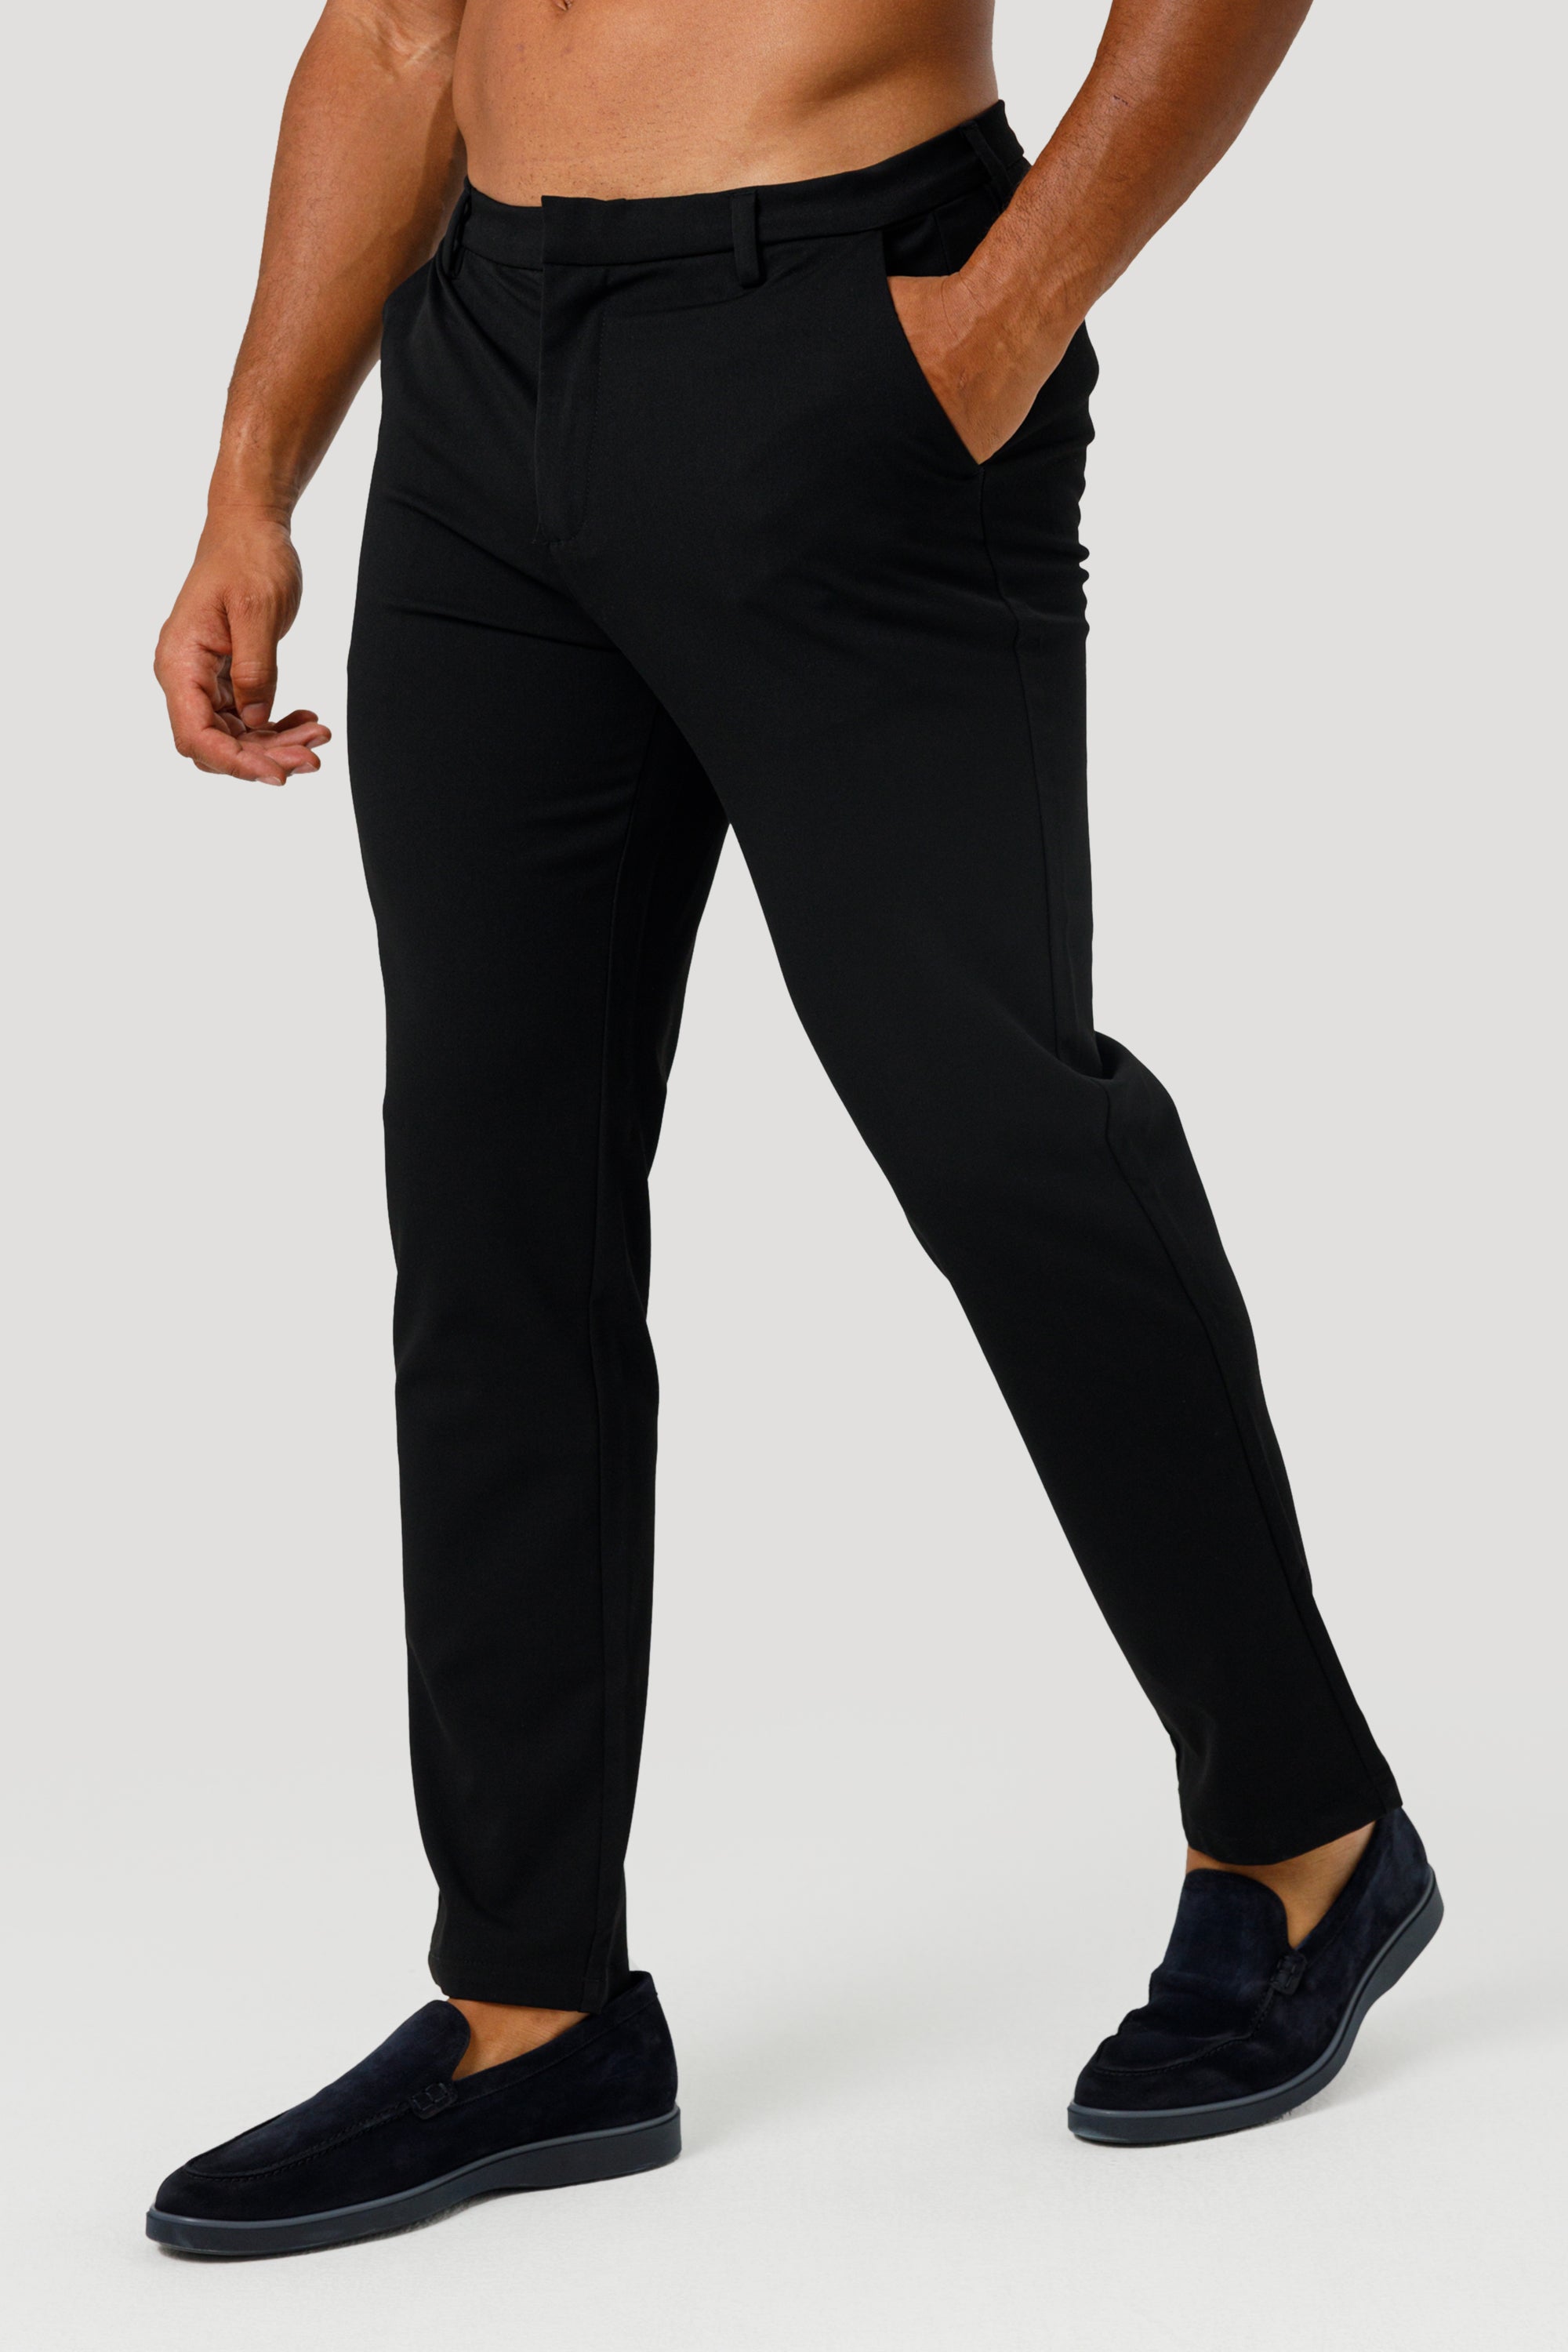 THE LUCIA TROUSERS - NEGRO